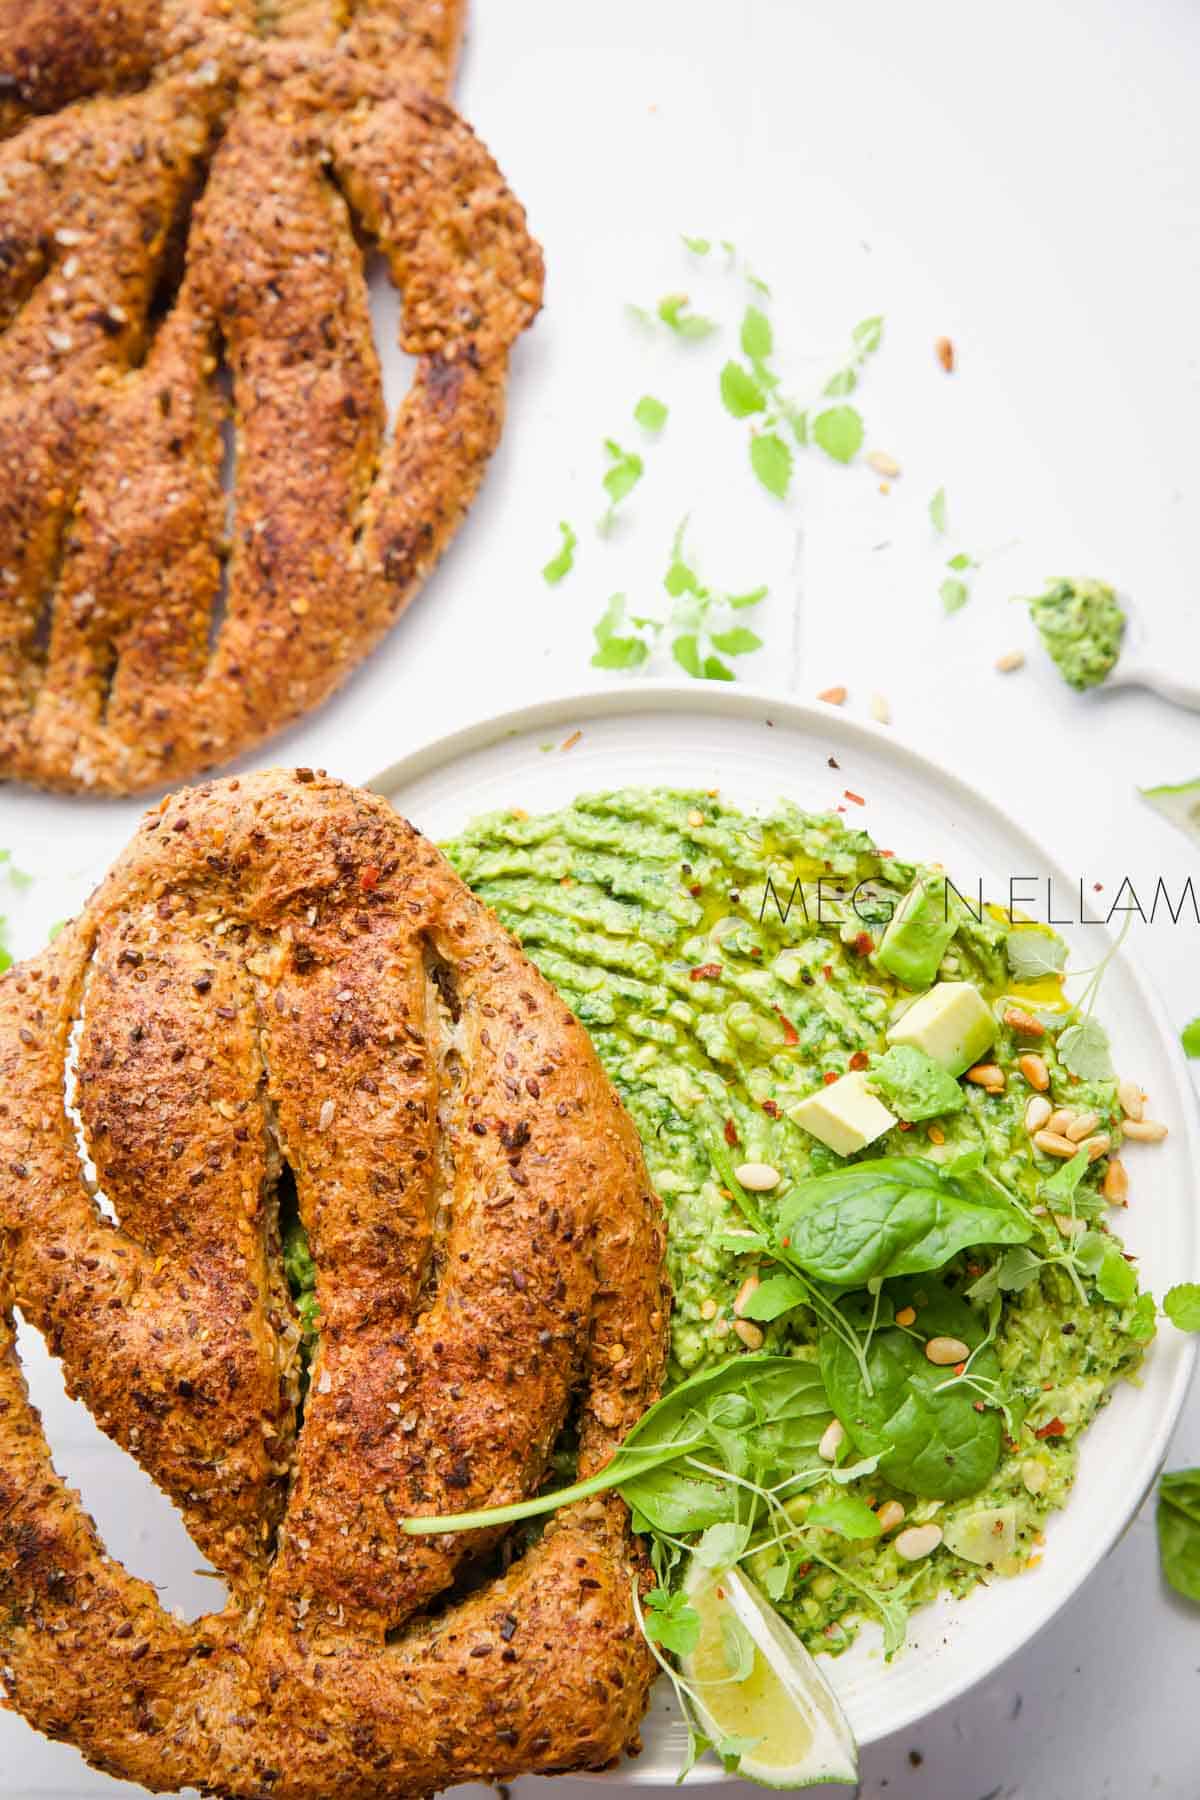 Low carb fougasse on a plate with avocado dip.